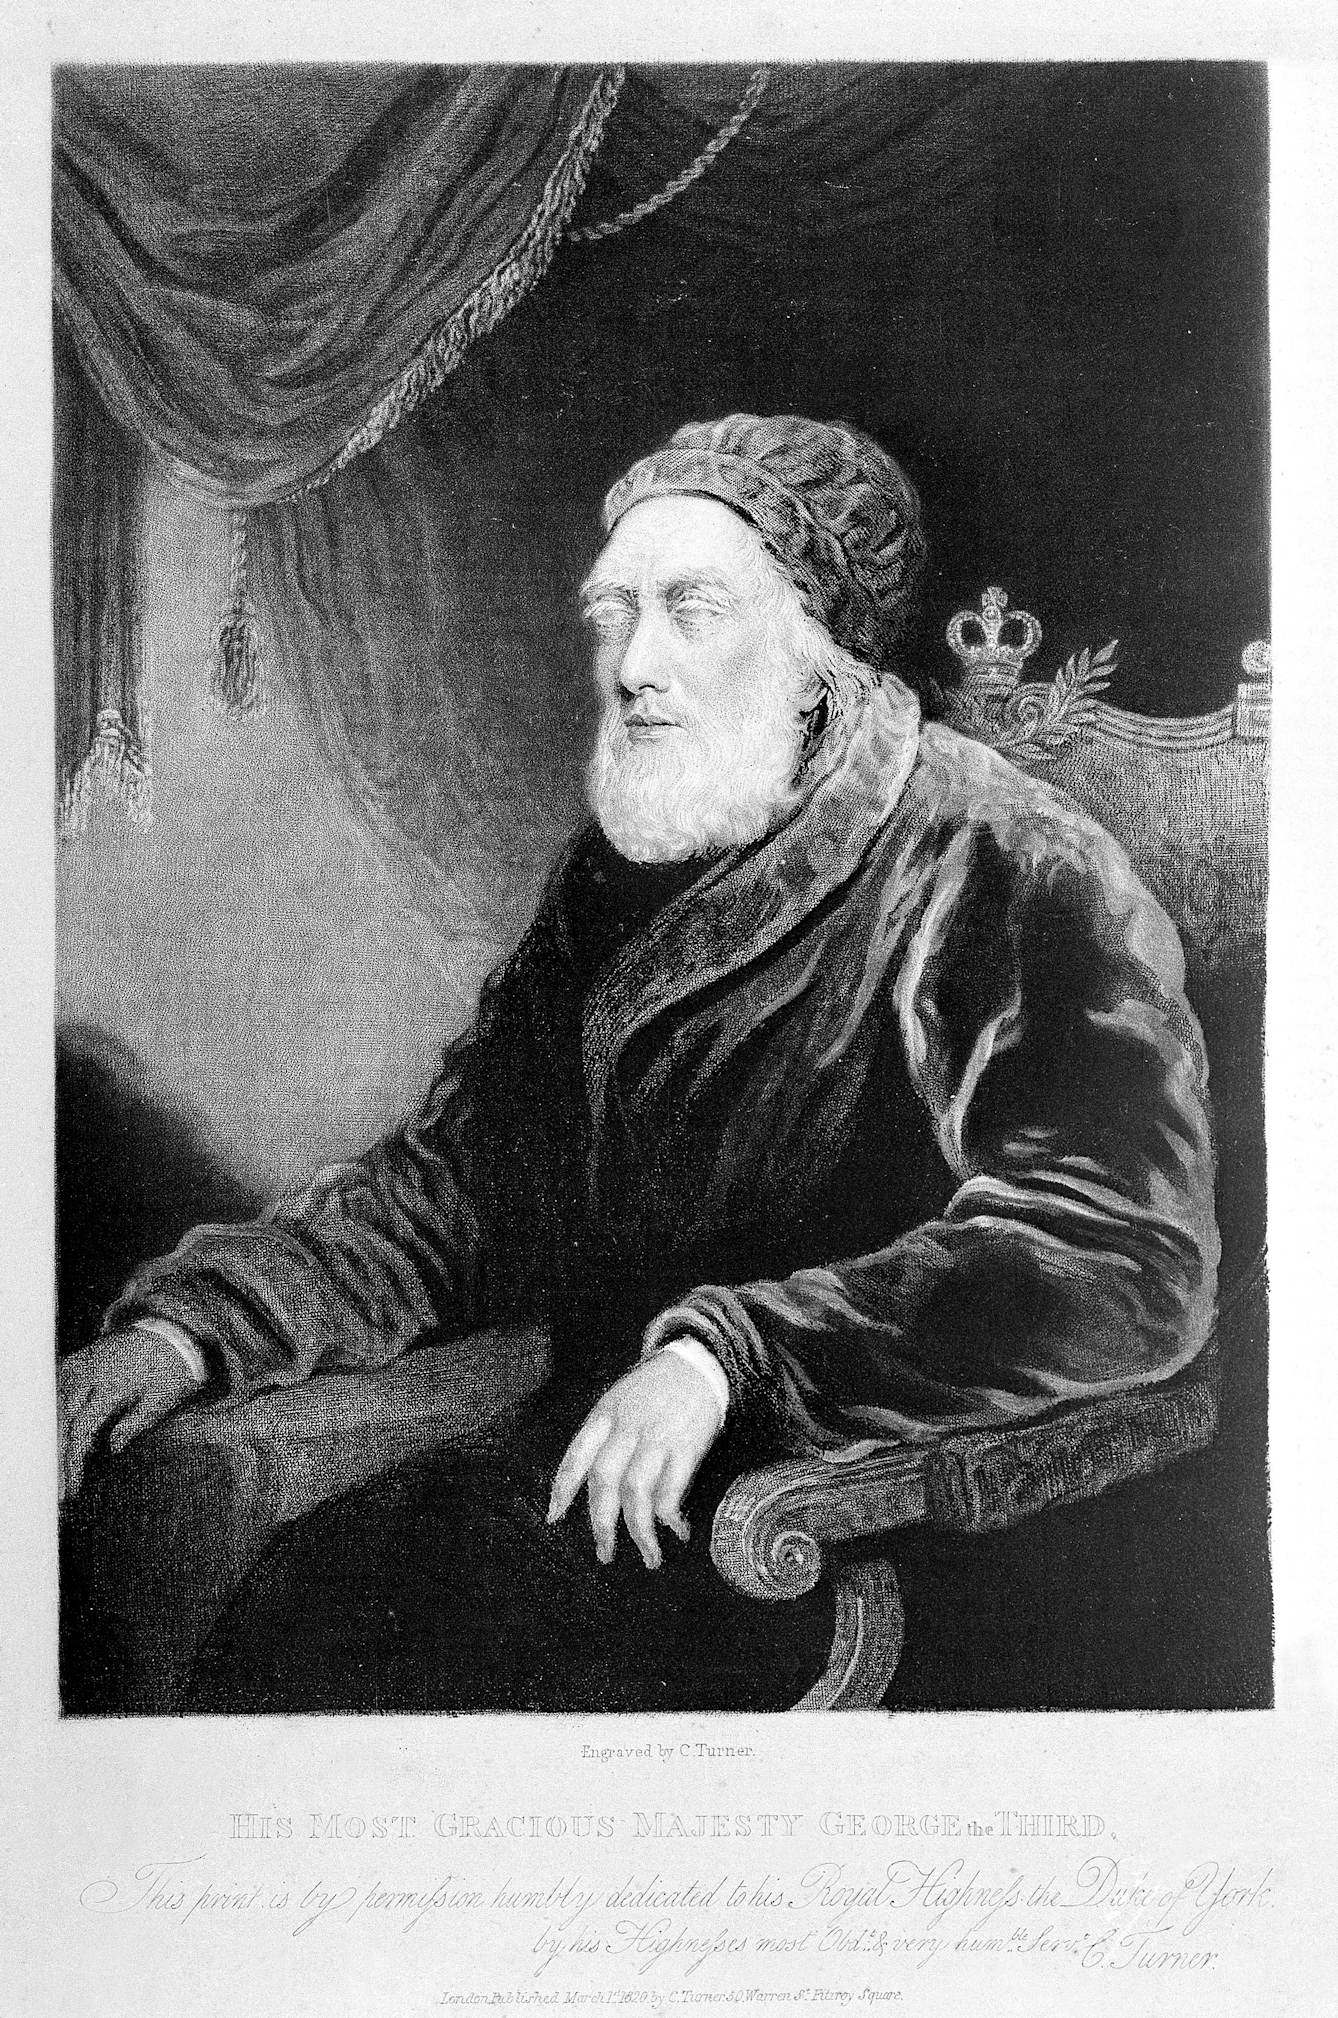 Black and white engraving of an old man with cataracts glazing his eyes and white beard.